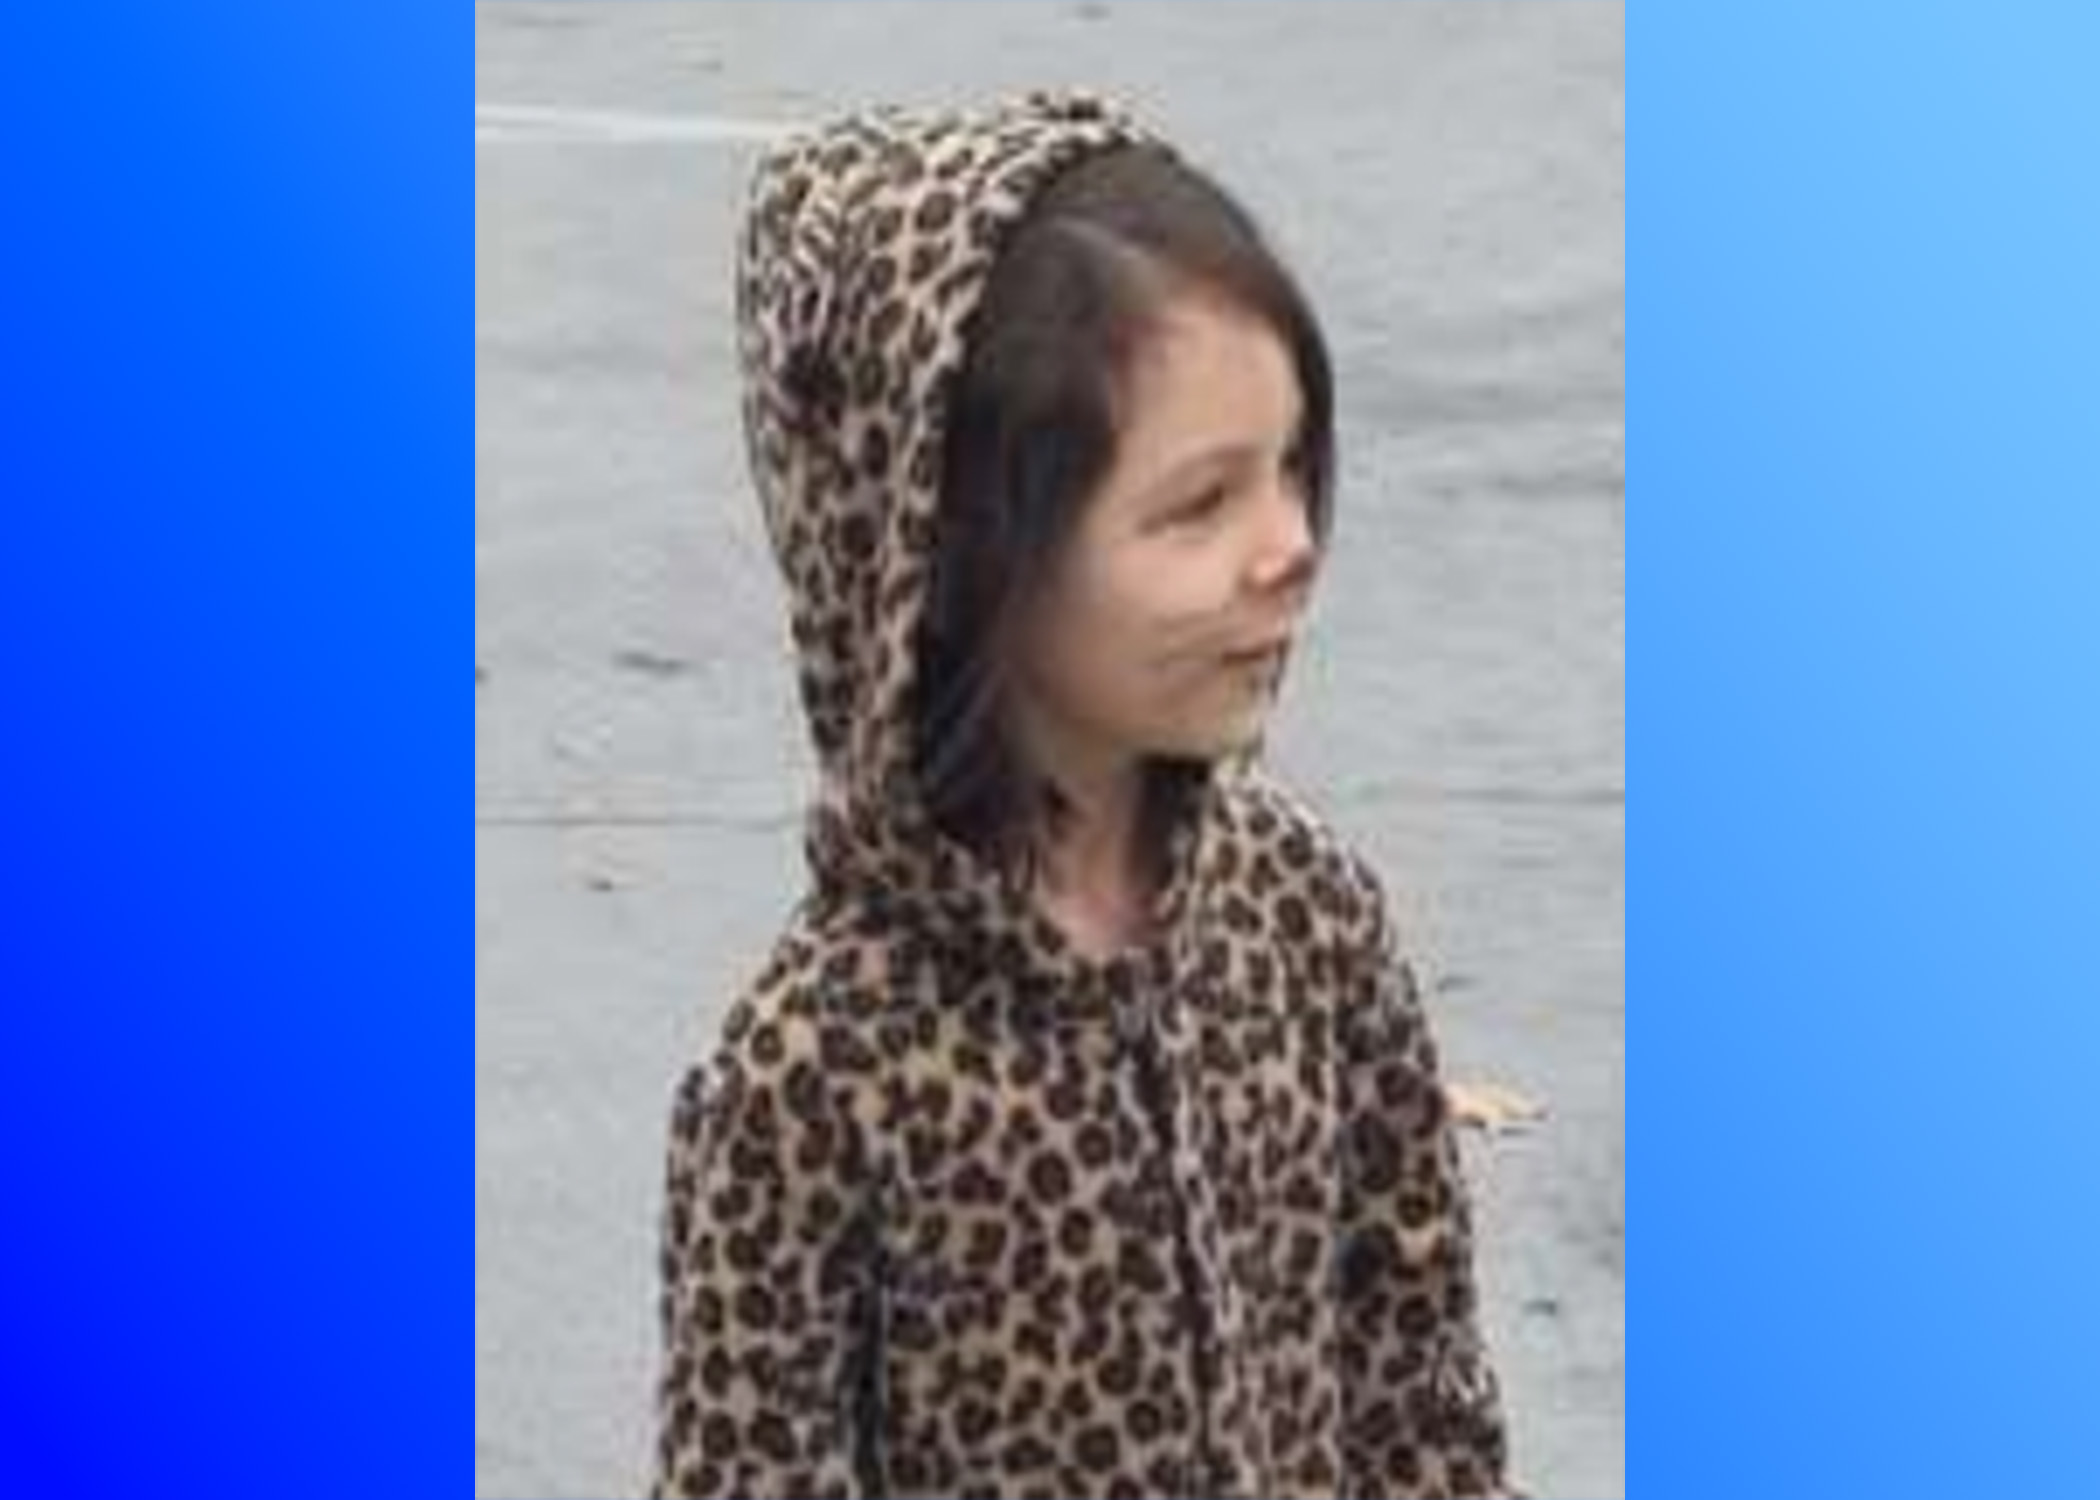 UPDATE: 6-year-old child missing from Springville found safe, mother arrested